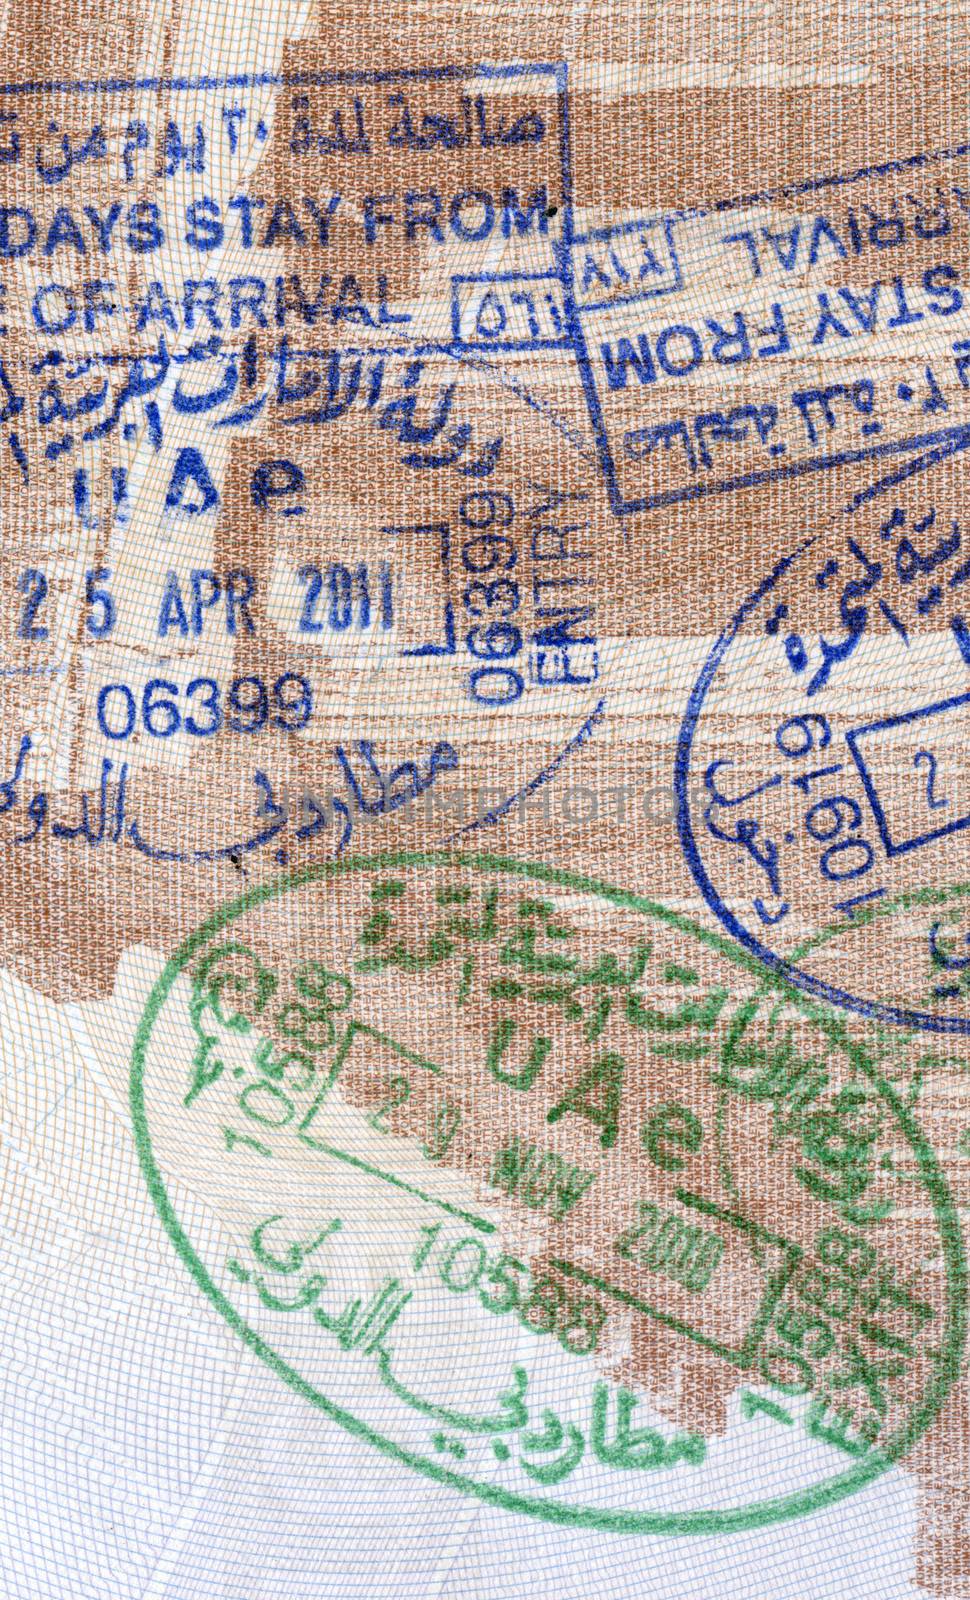 Background of passport stamps closeup by Portokalis